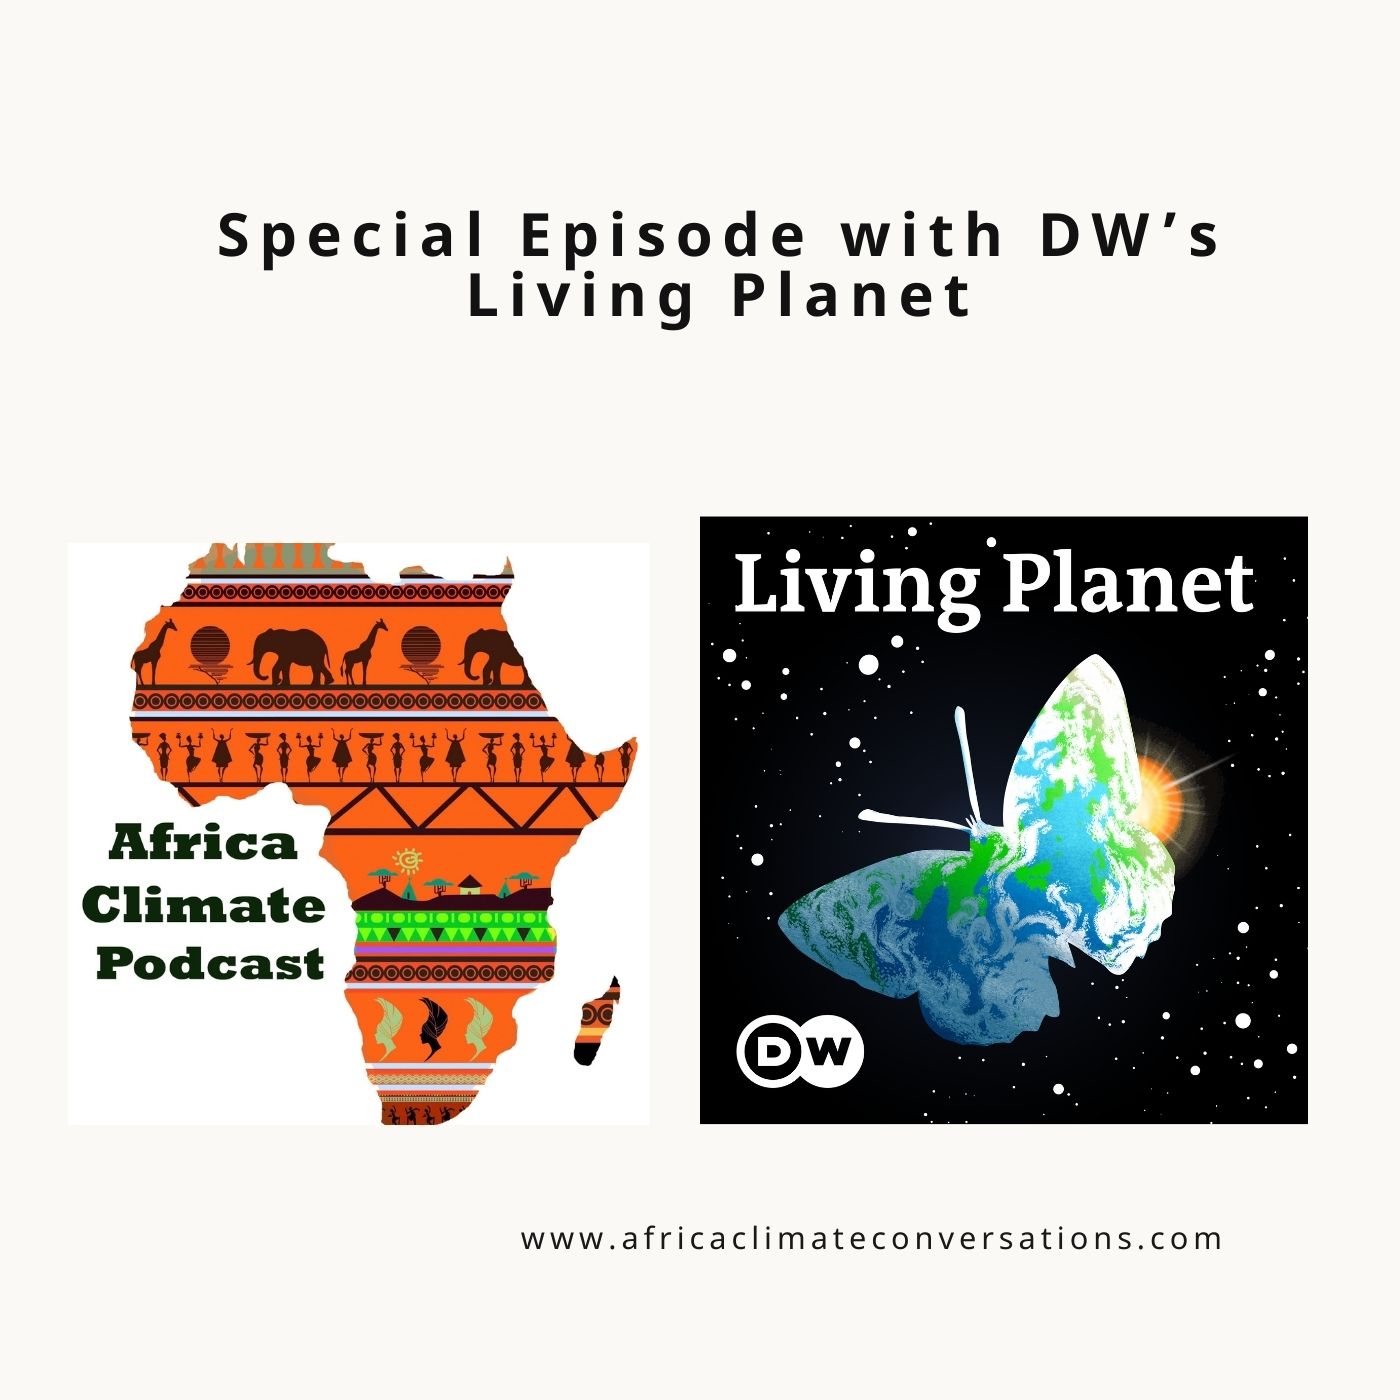 Special Episode with DW’s Living Planet